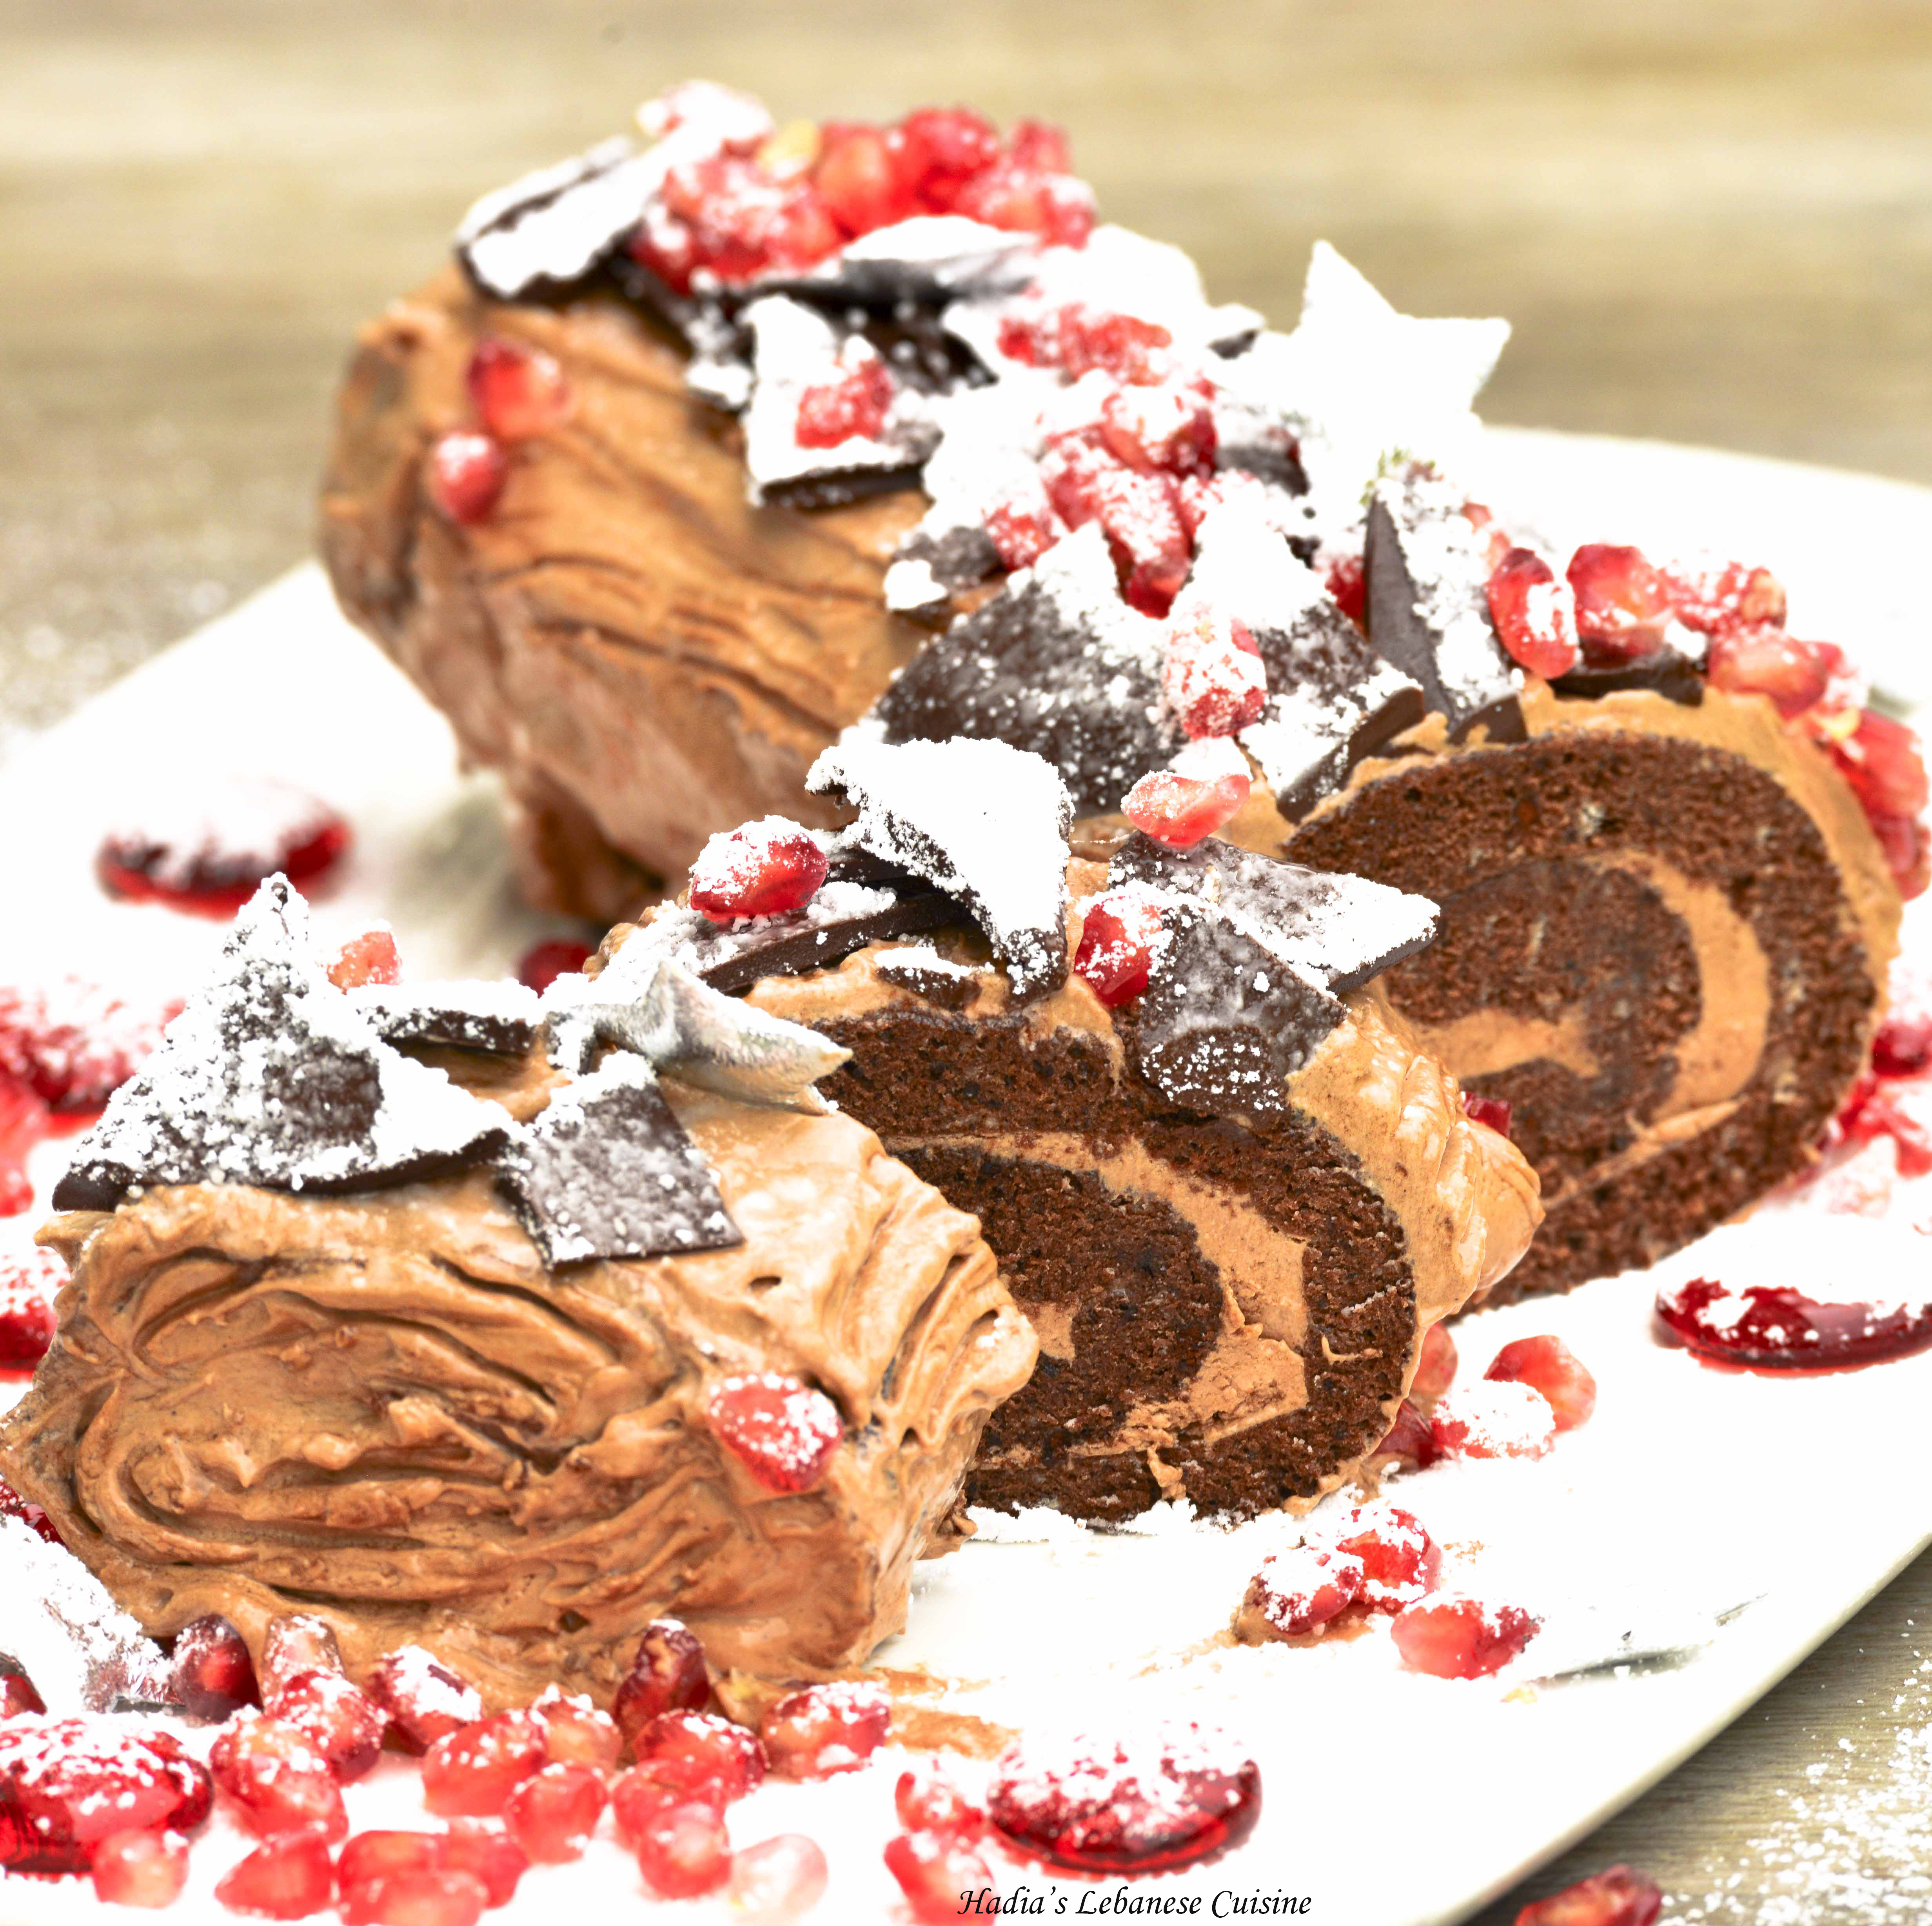 Add some 'Ho Ho' to the holiday with a mini Buche de Noel